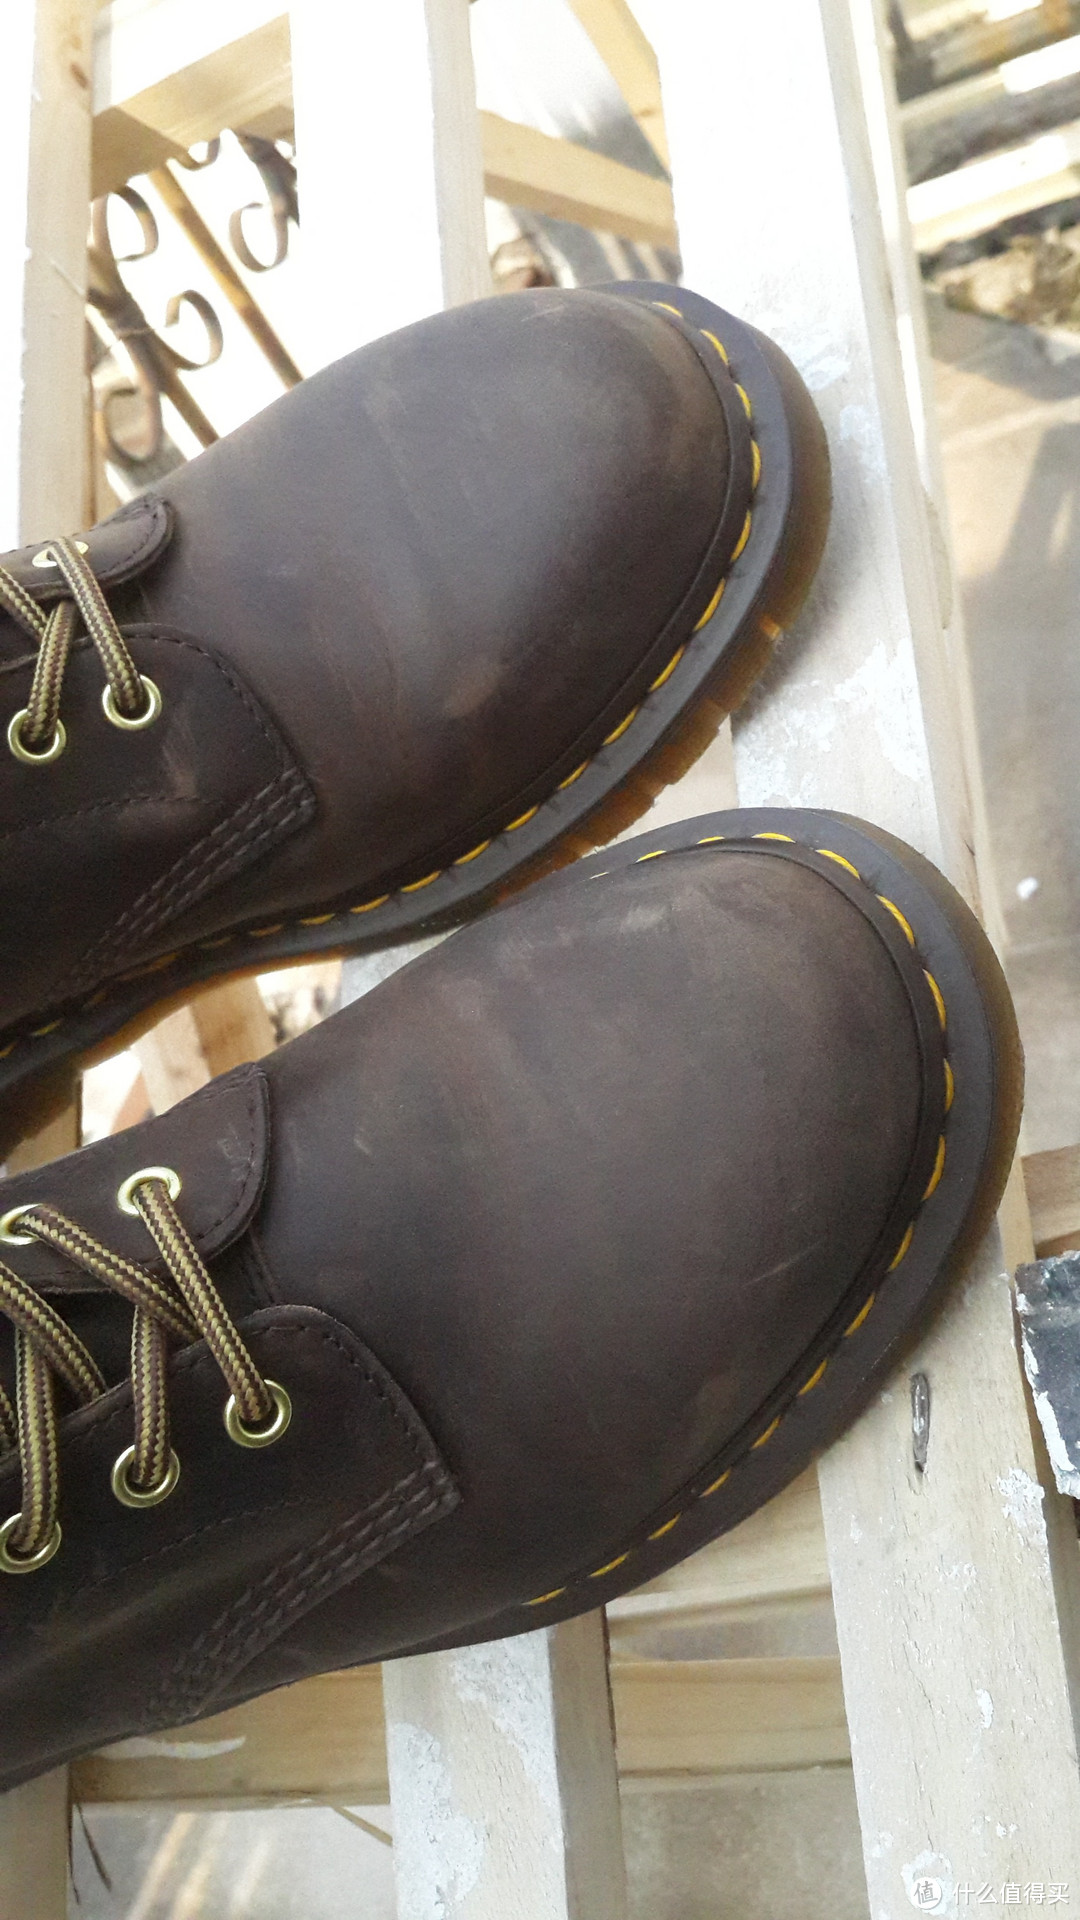 Dr. Martens 1460 Re-Invented Aztec Crazyhorse Leather 男款马丁靴